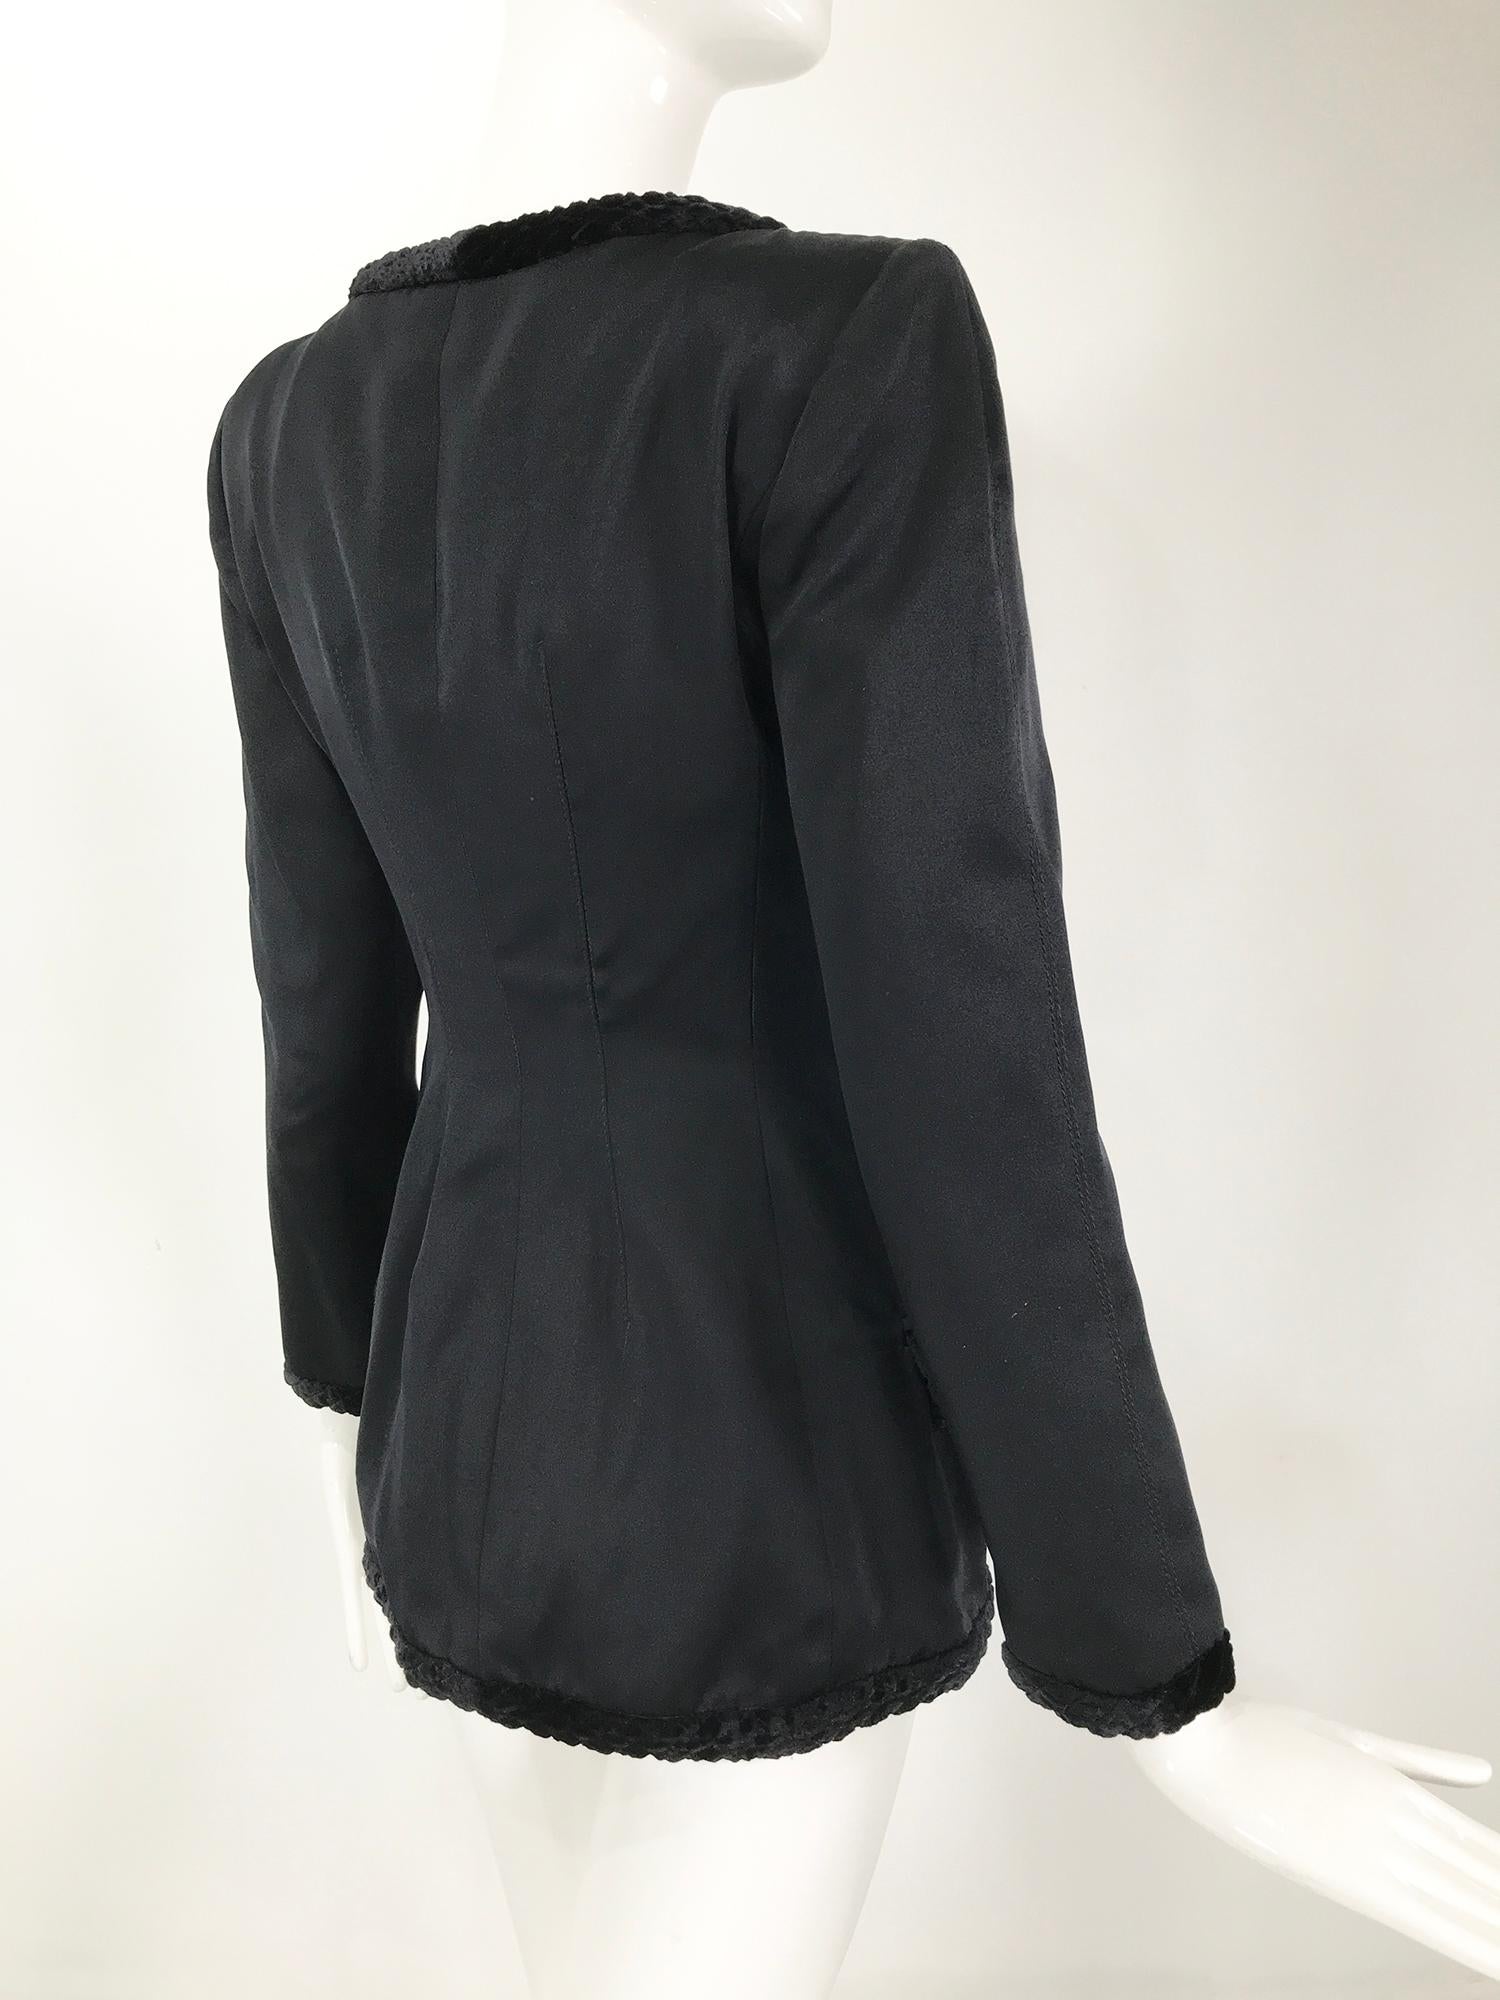 Valentino Black Silk Fitted Jewel Button Evening Jacket 1990s For Sale 3